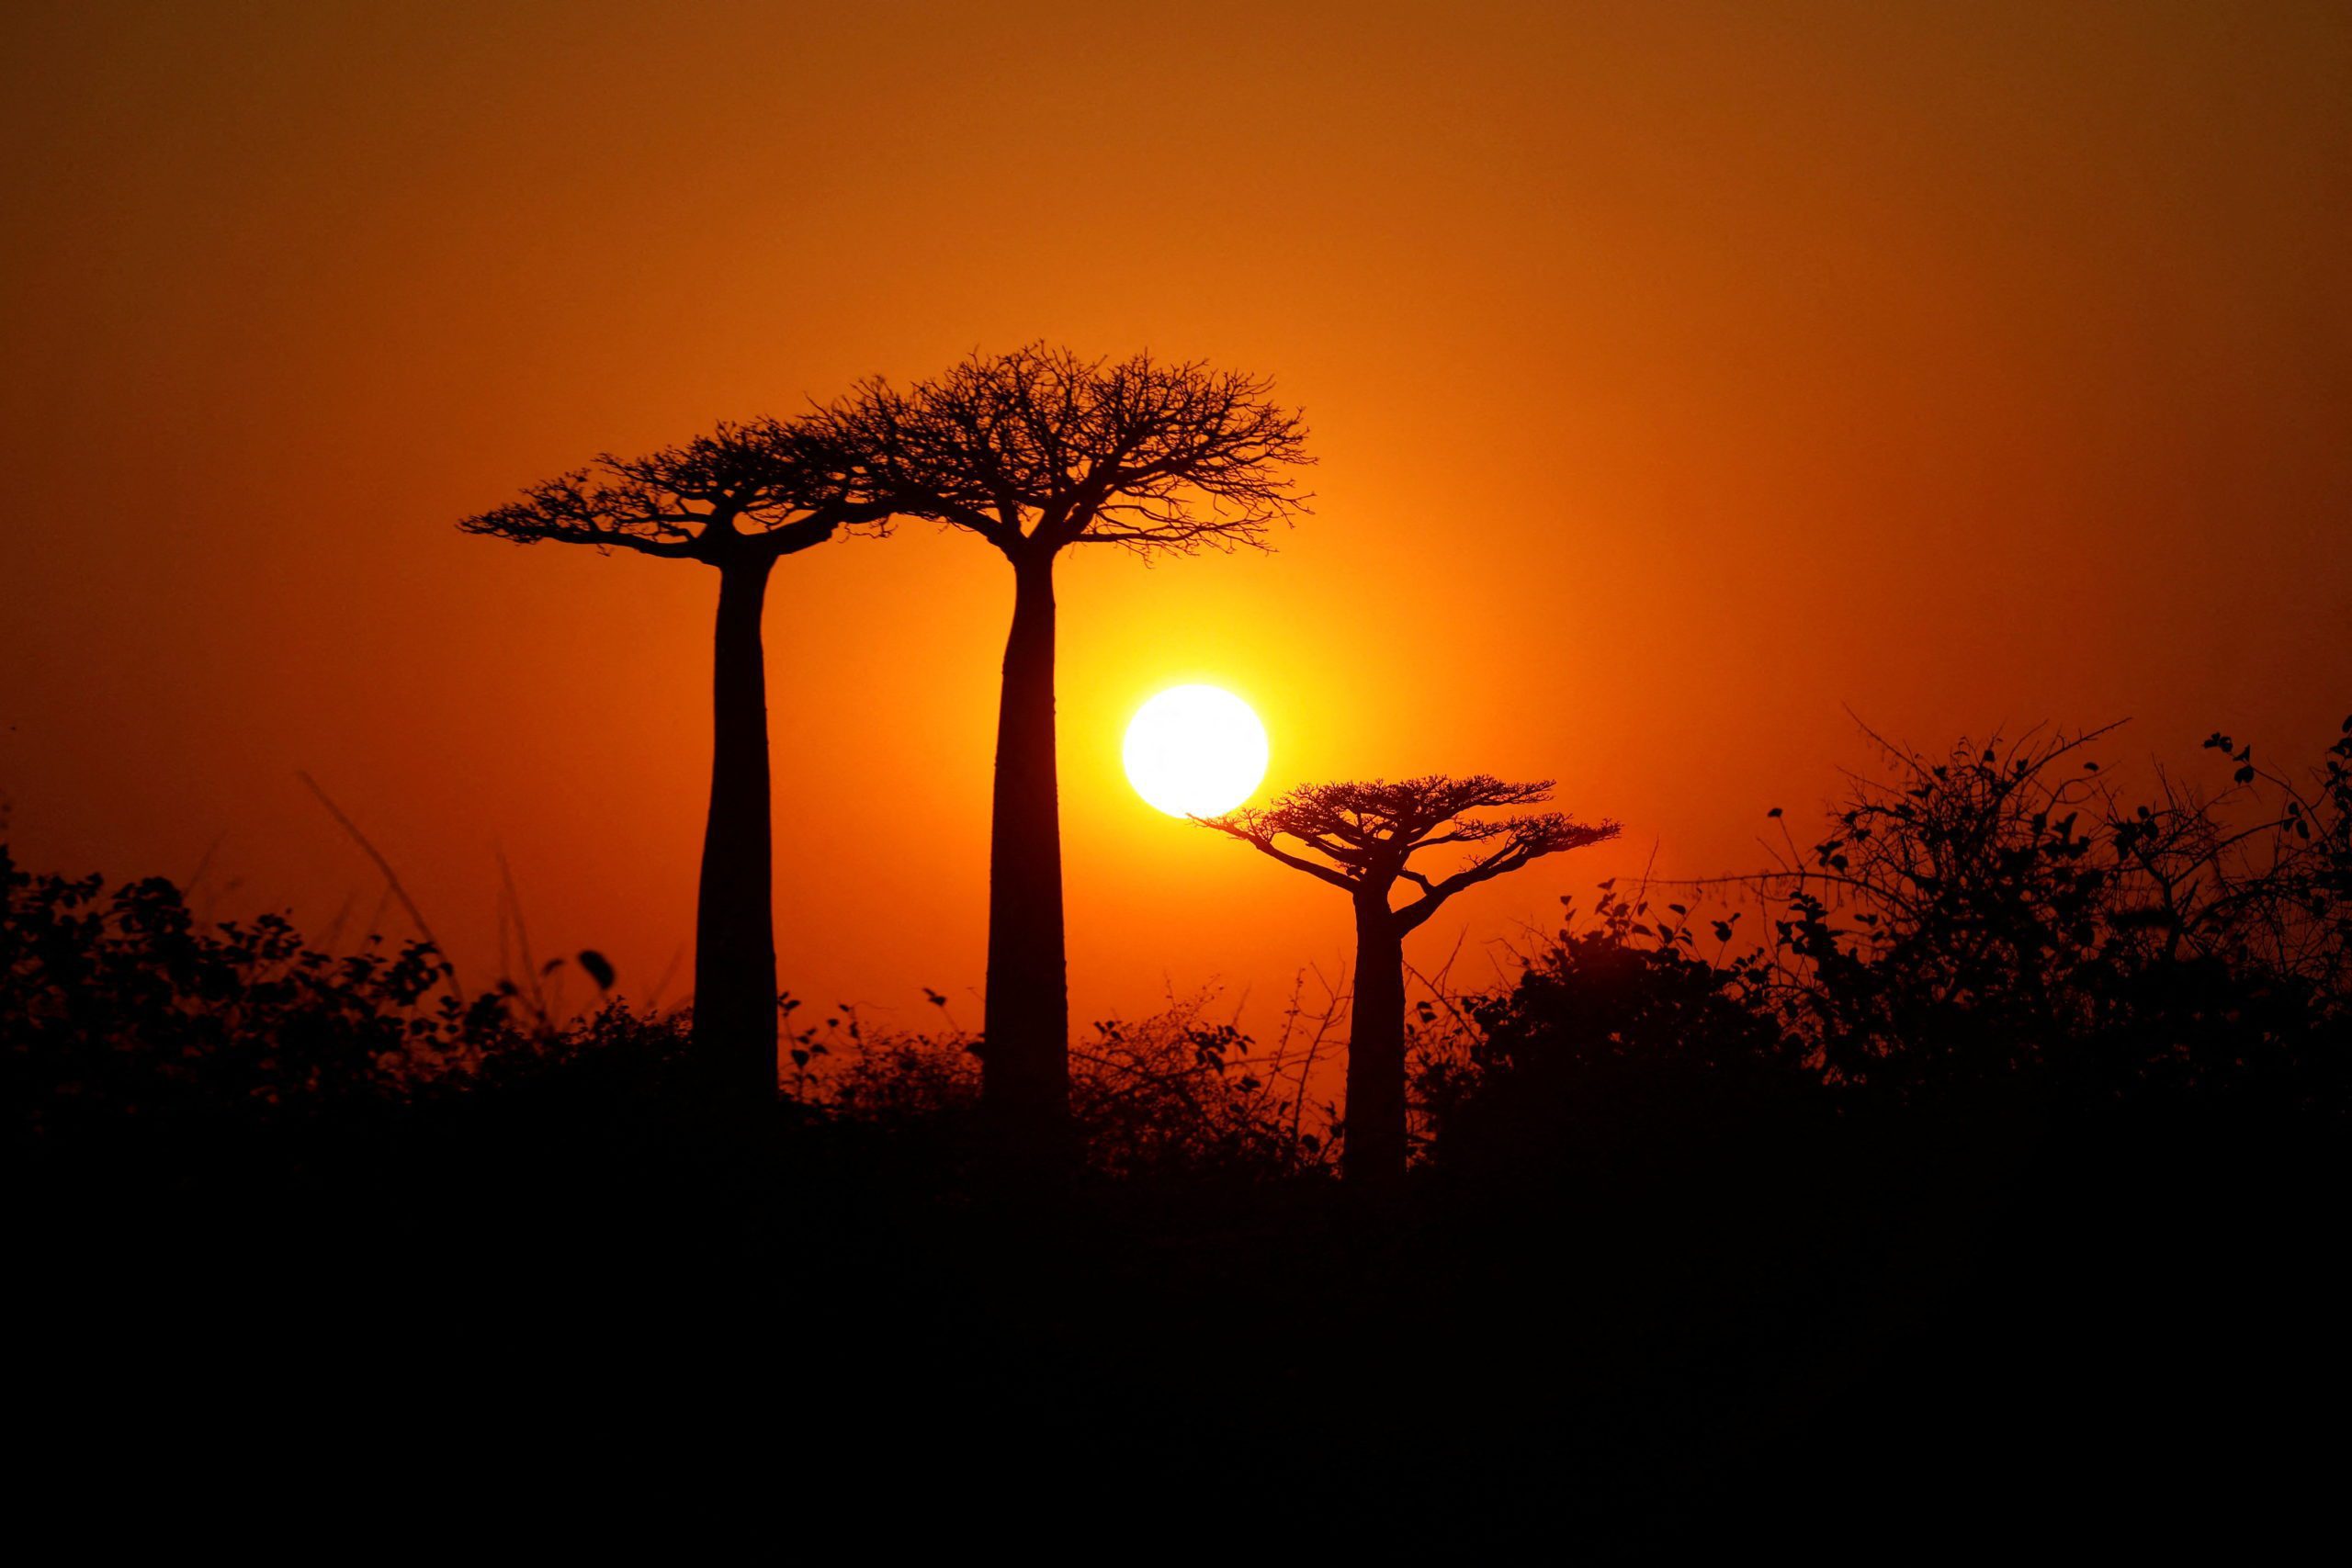 FILE PHOTO: The sun rises behind Baobab trees at Baobab alley near the city of Morondava, Madagascar, August 30, 2019. REUTERS/Baz Ratner